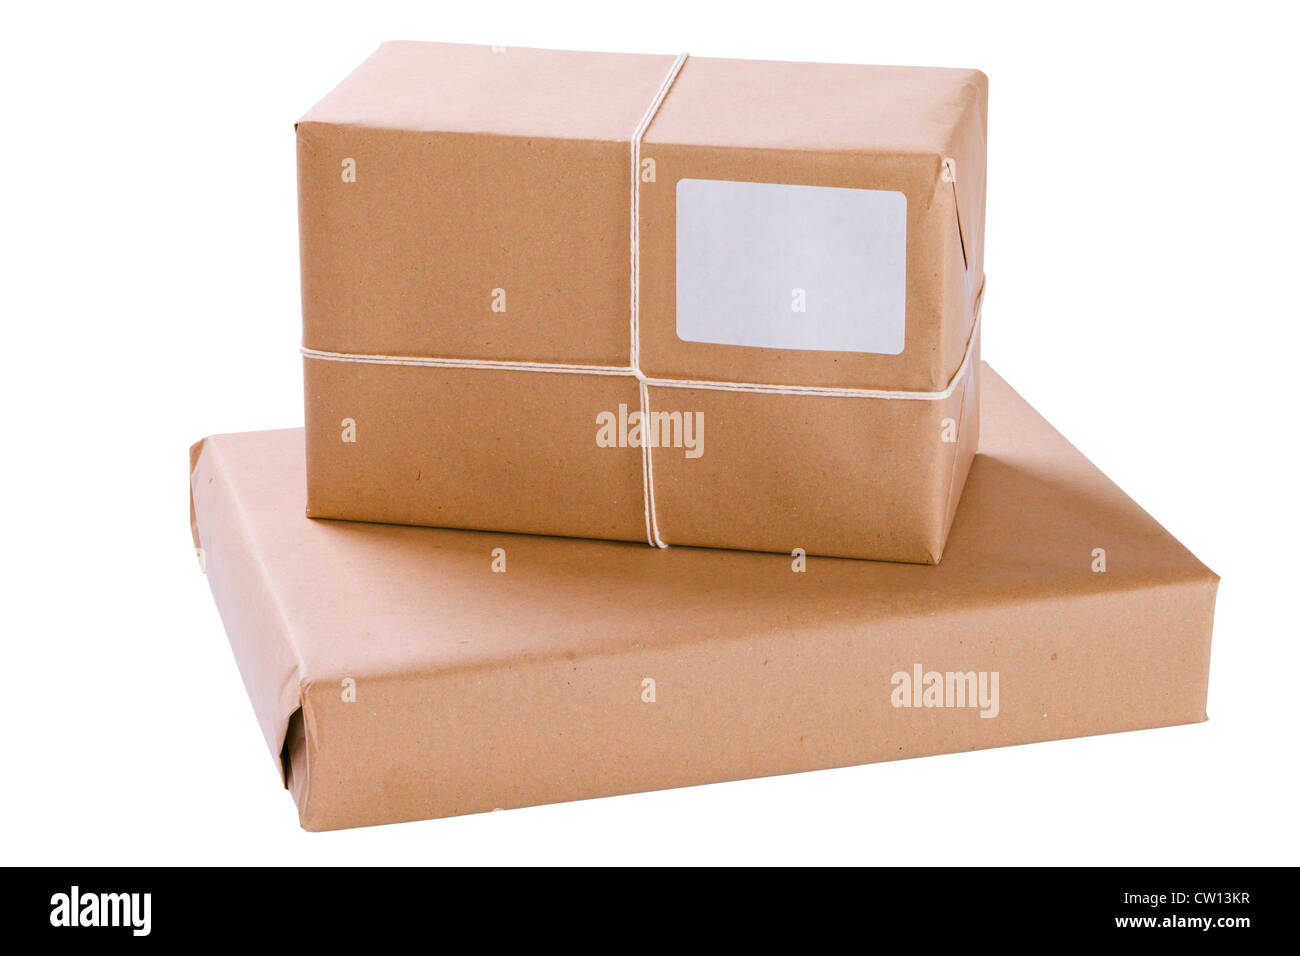 Two brown paper parcels in a stack, isolated on white with clipping path. Stock Photo